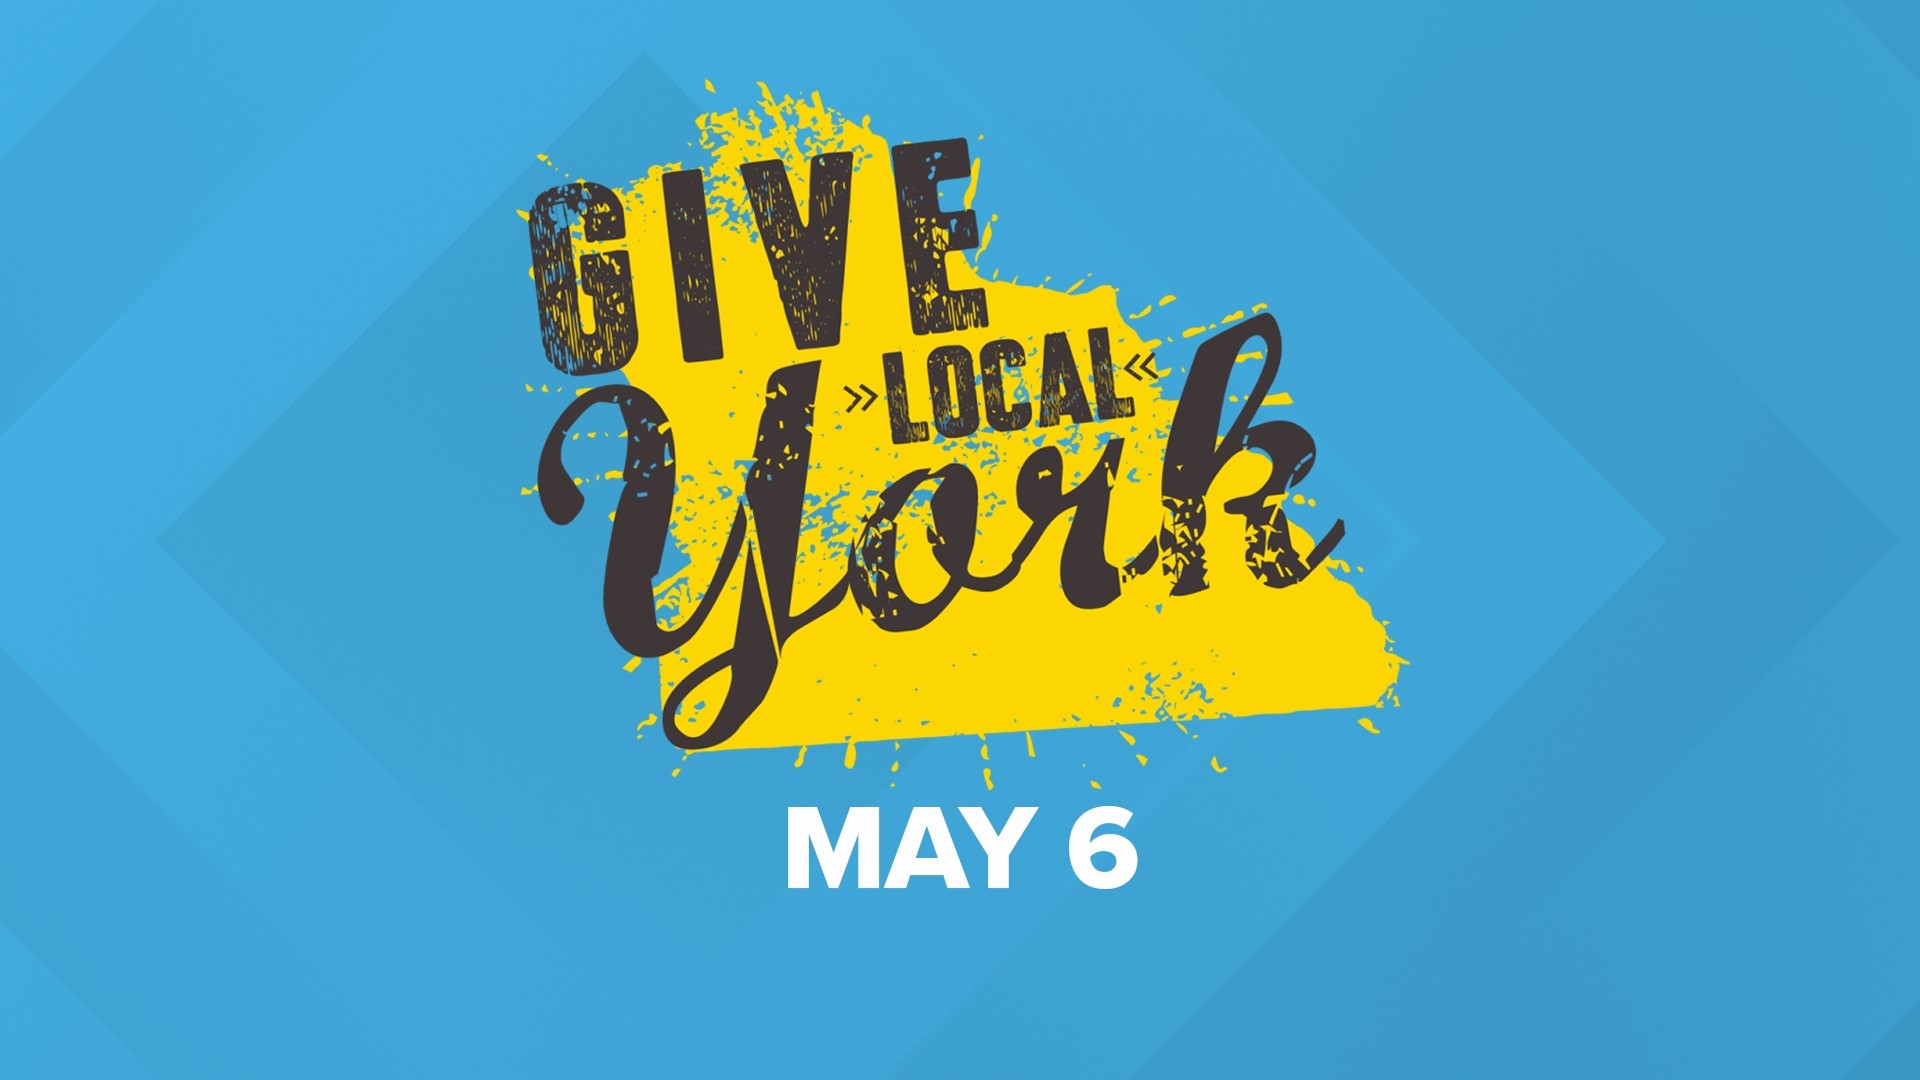 According to the official Give Local York website, over 10,000 donors contributed to the 292 organizations involved.